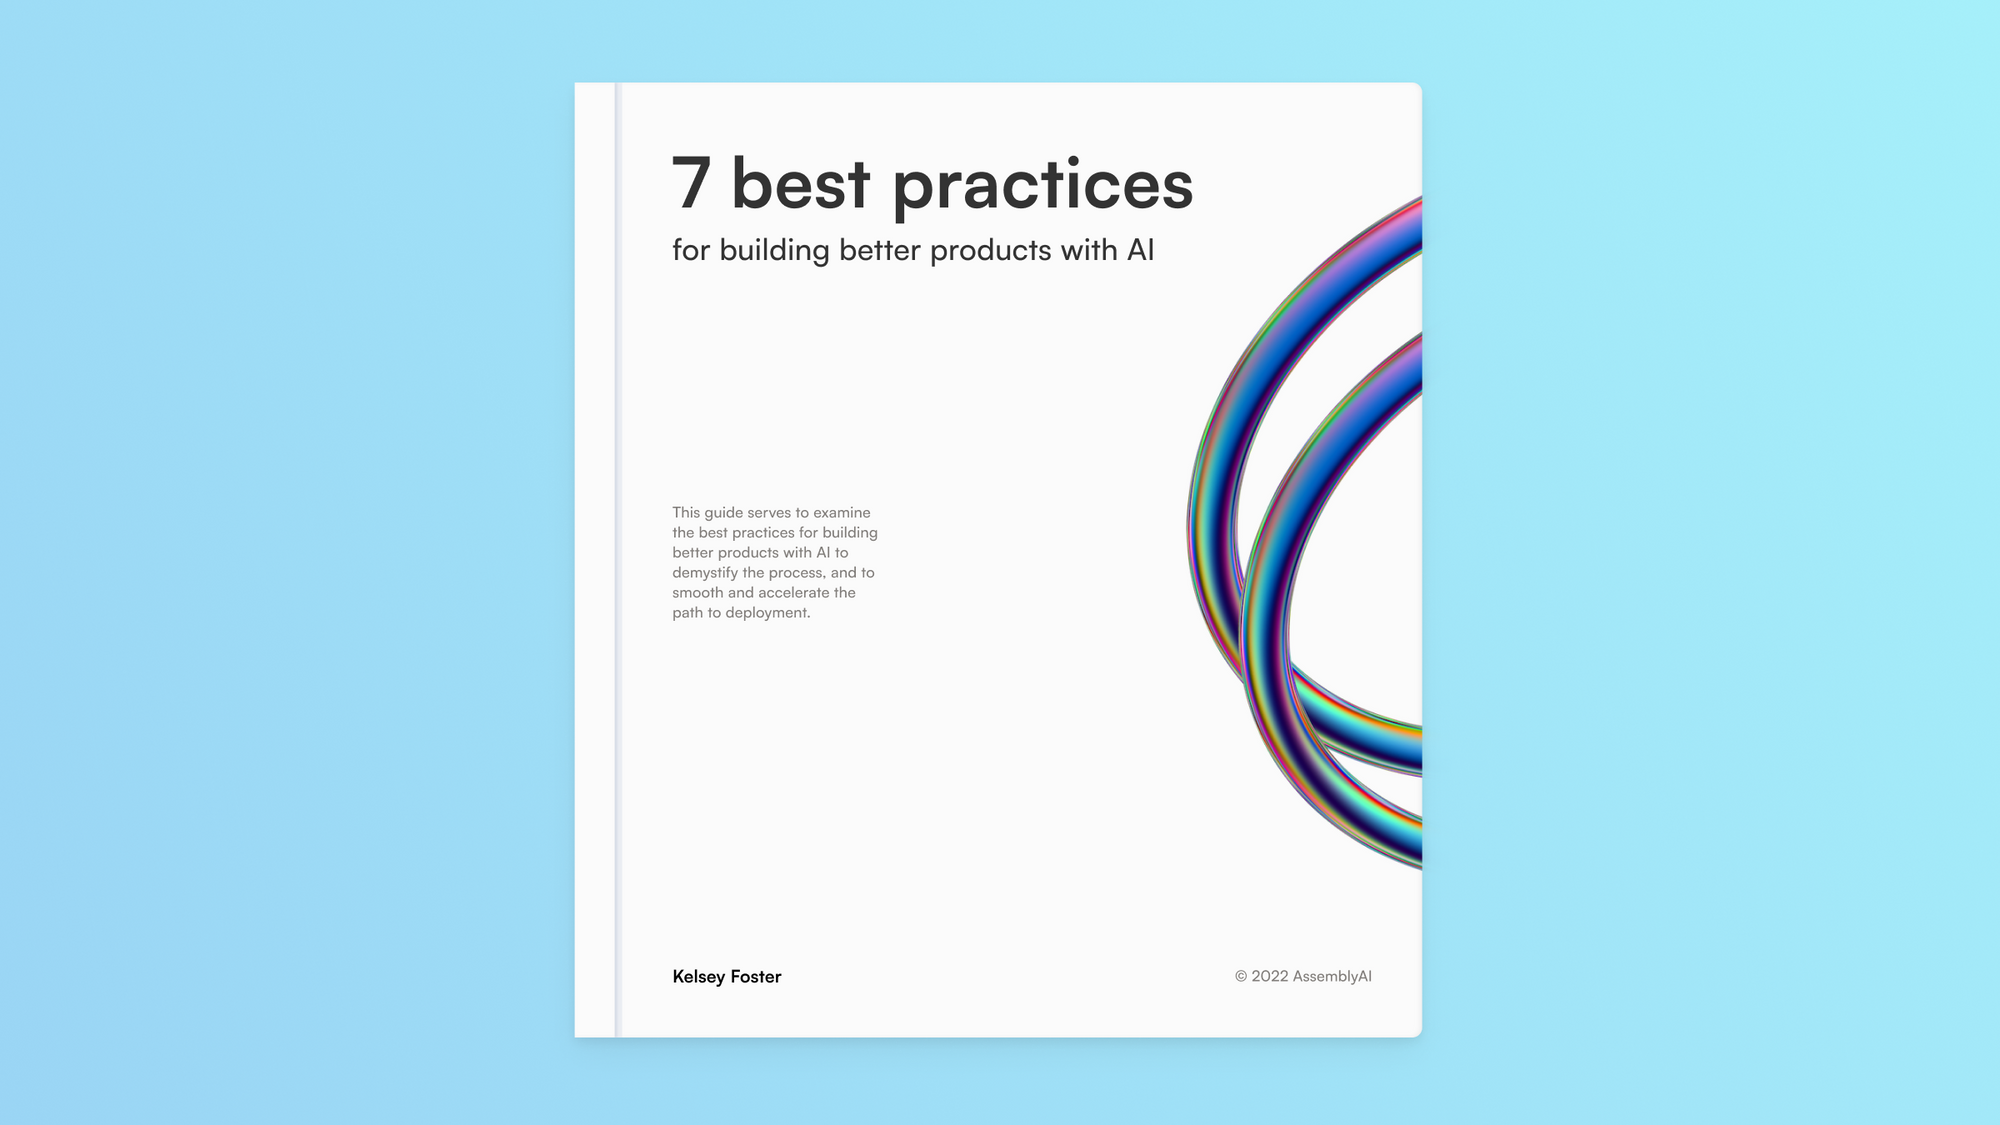 7 best practices for building better products with AI